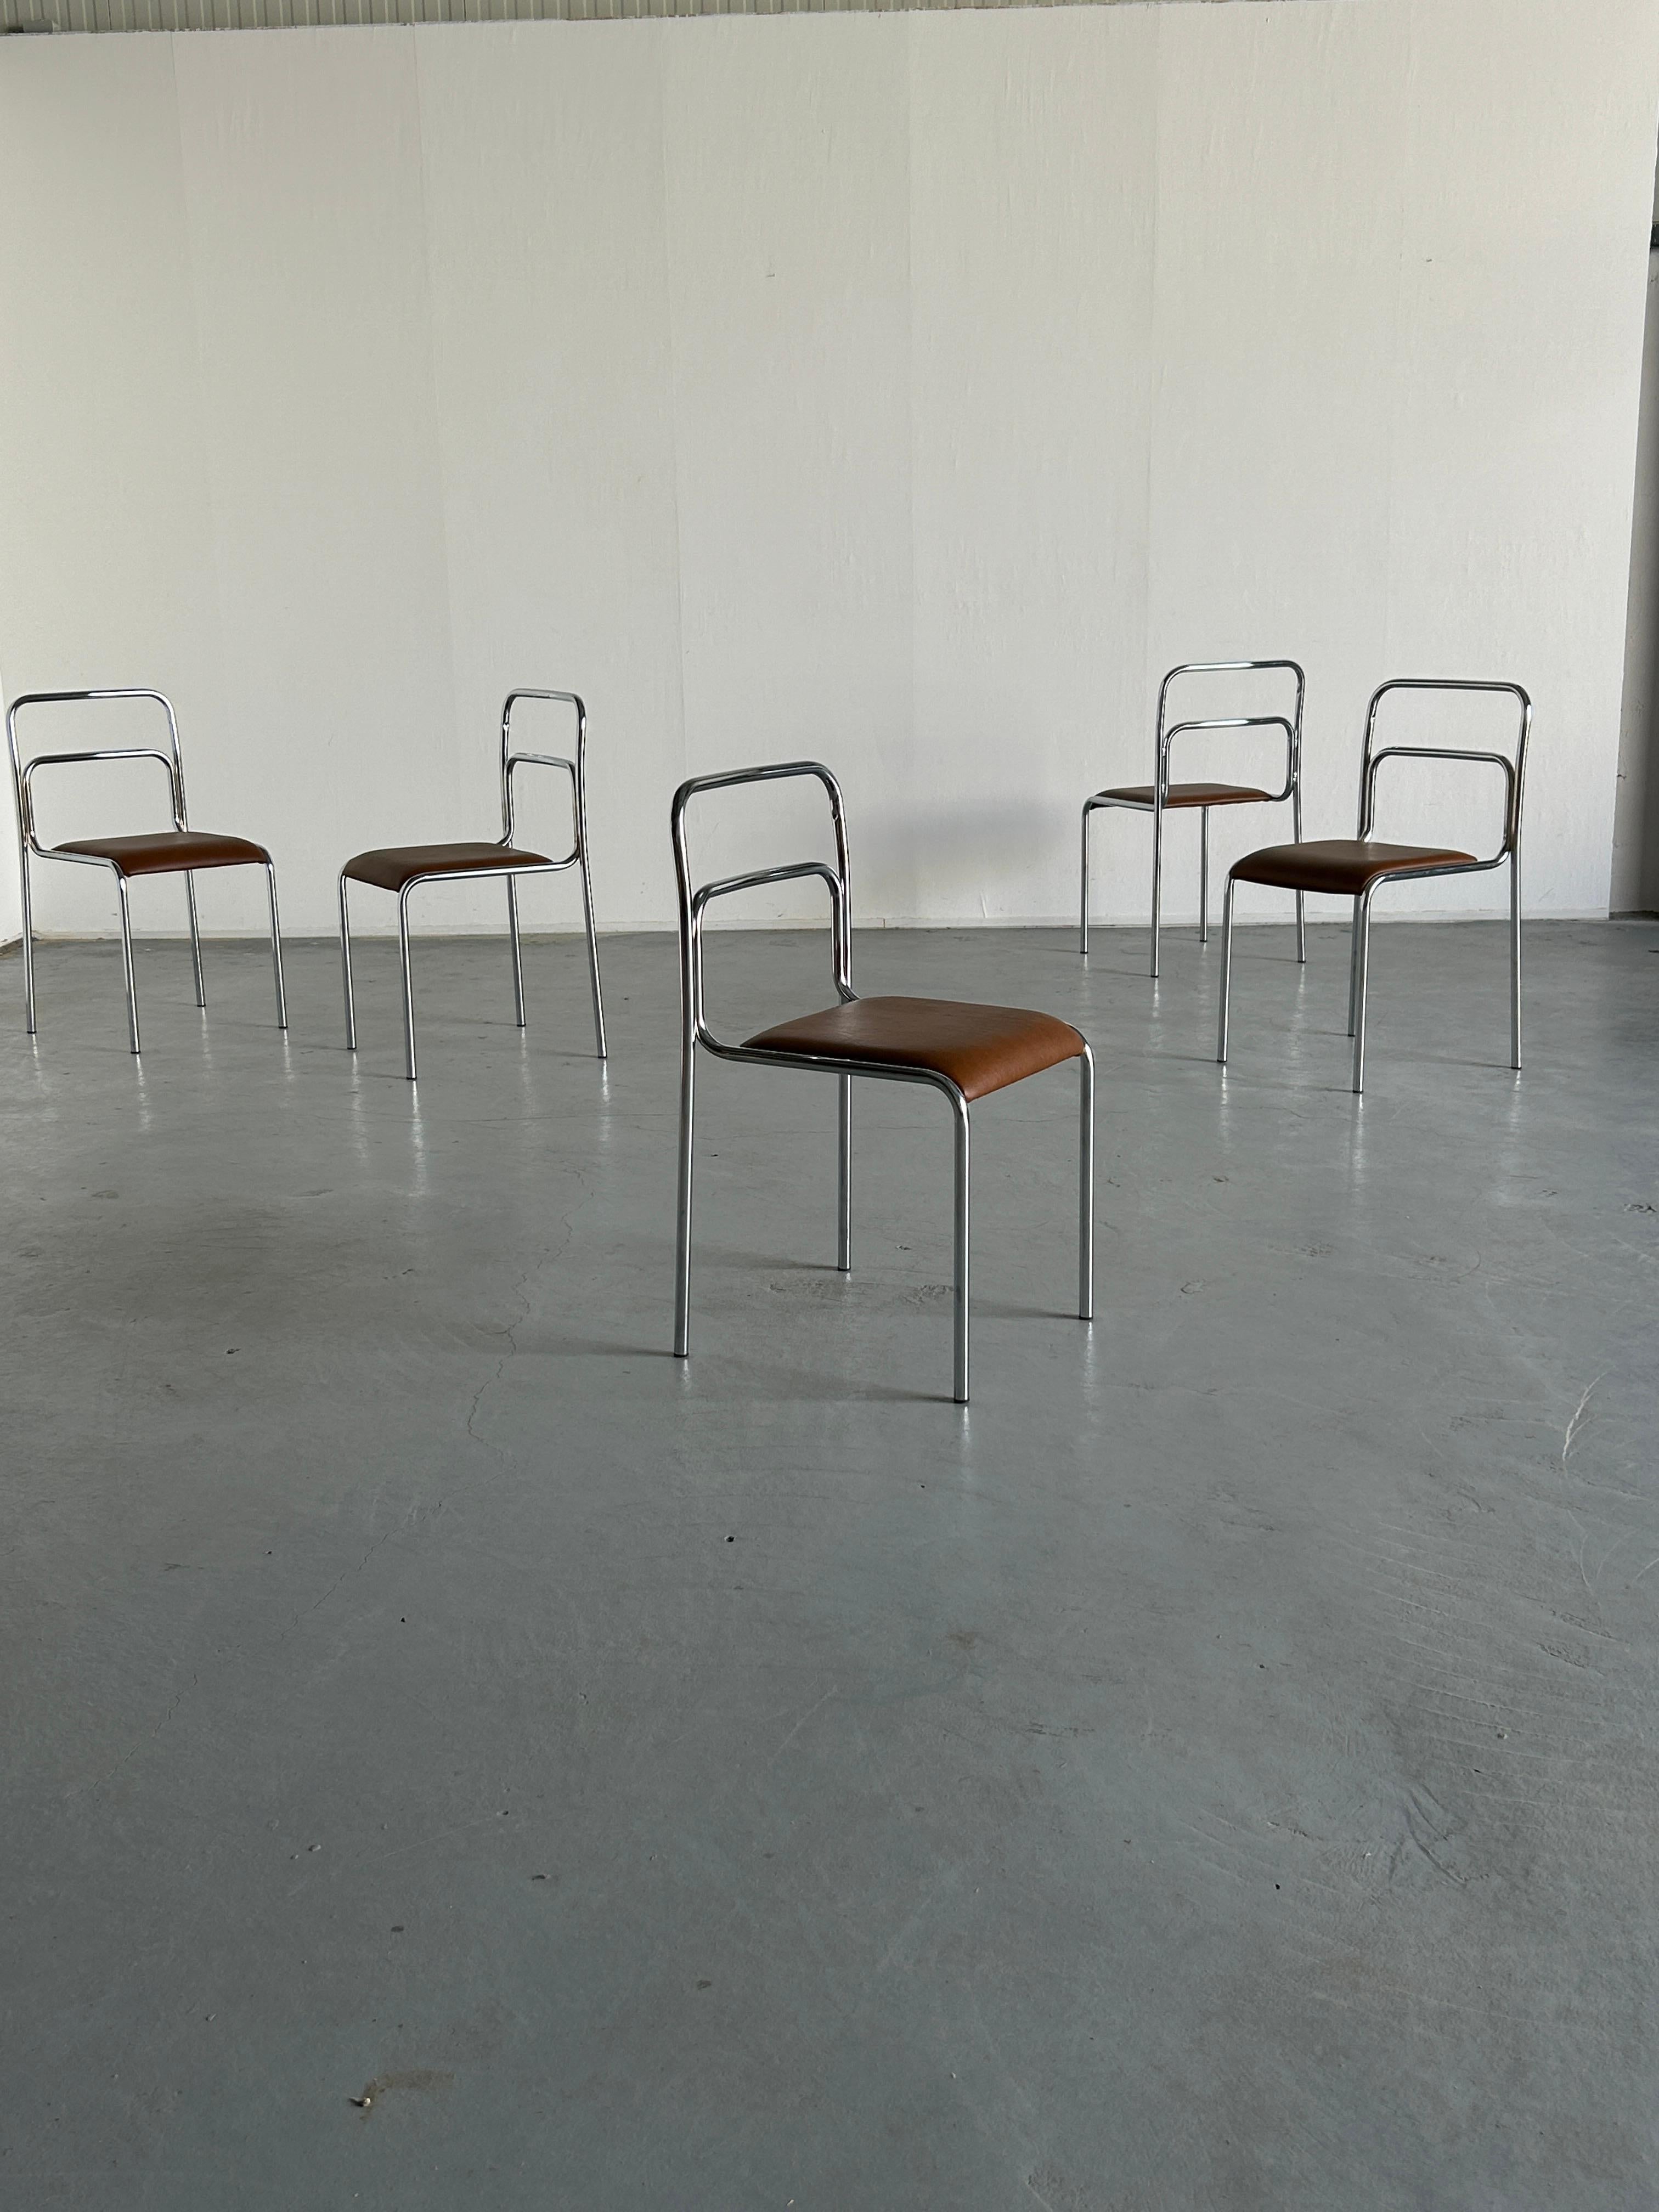 Italian modernist, Bauhaus design tubular chrome and brown faux leather stackable dining or living room chairs.
Italian design of the 1980s.

Price is per piece. 
25 pieces available.

In excellent condition with minimal signs of age. 
All chairs